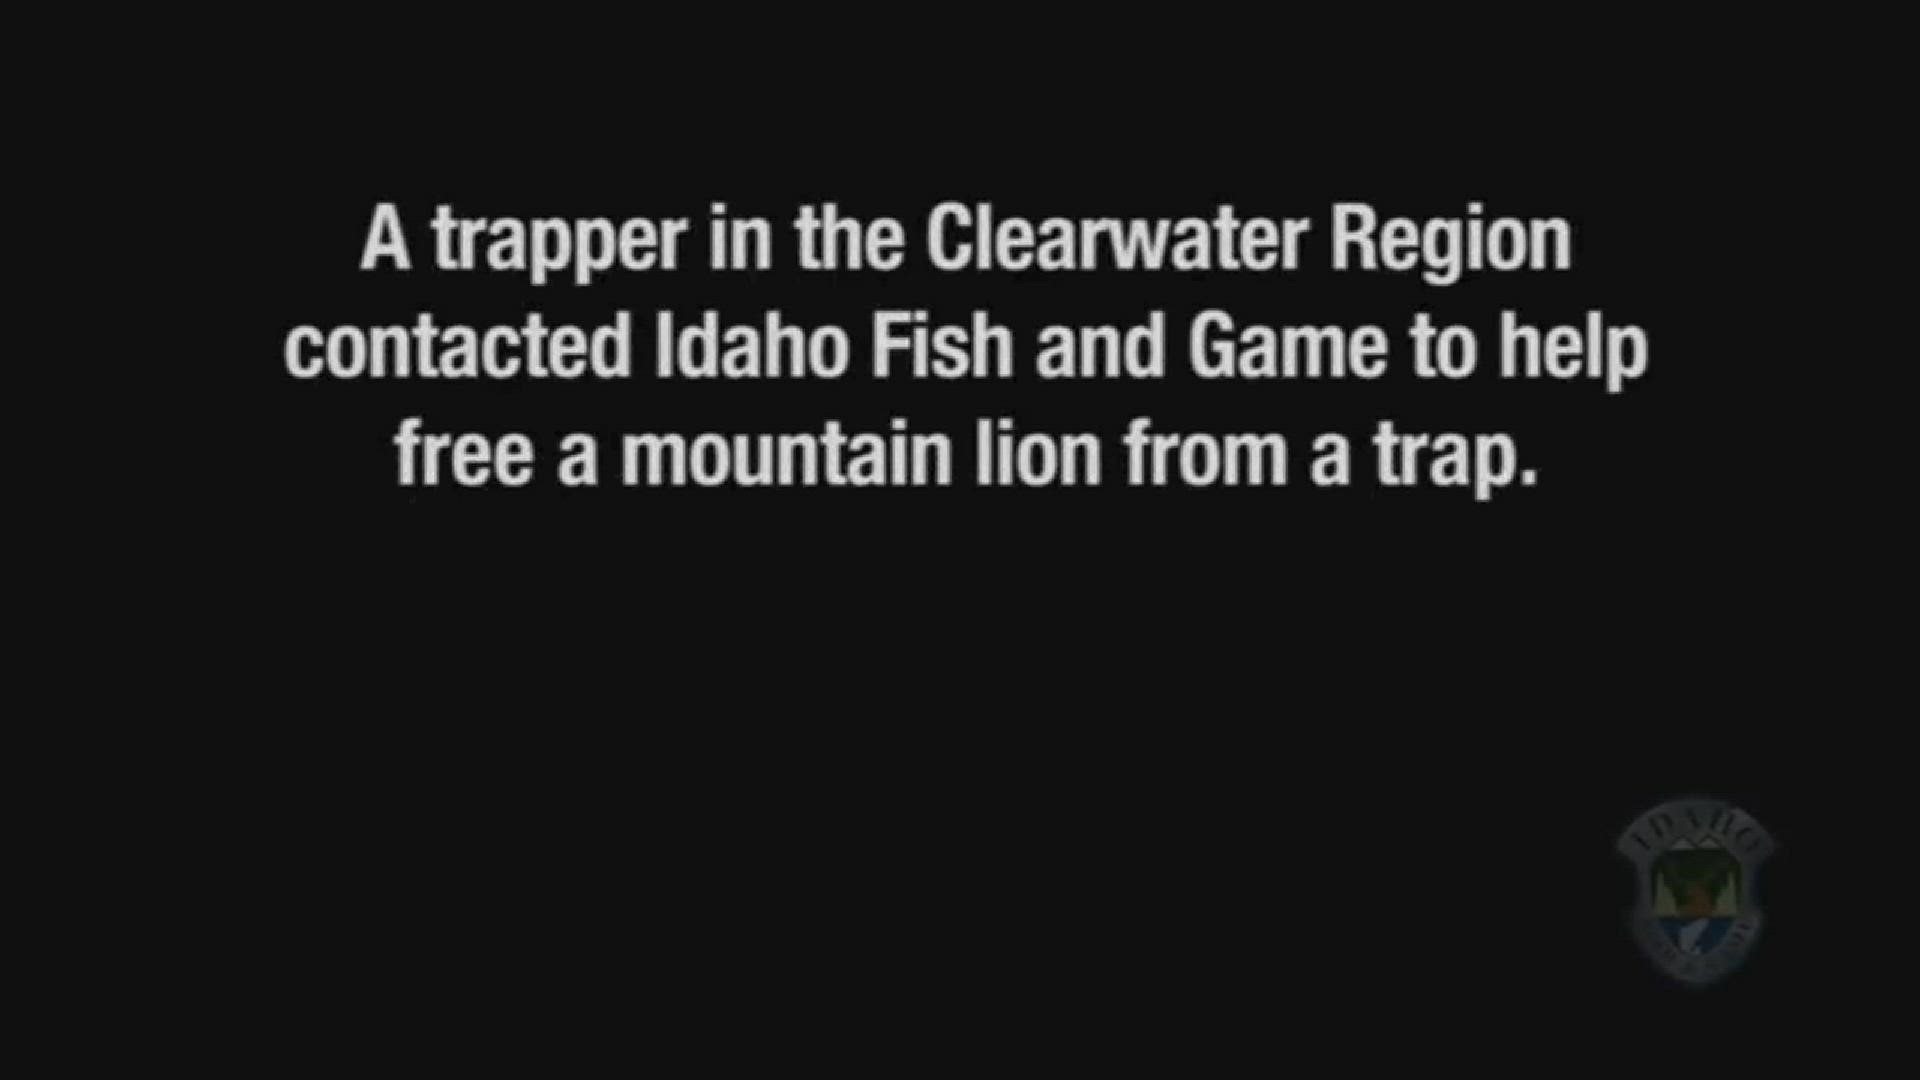 Watch Idaho Fish and Game officers free mountain lion from trap